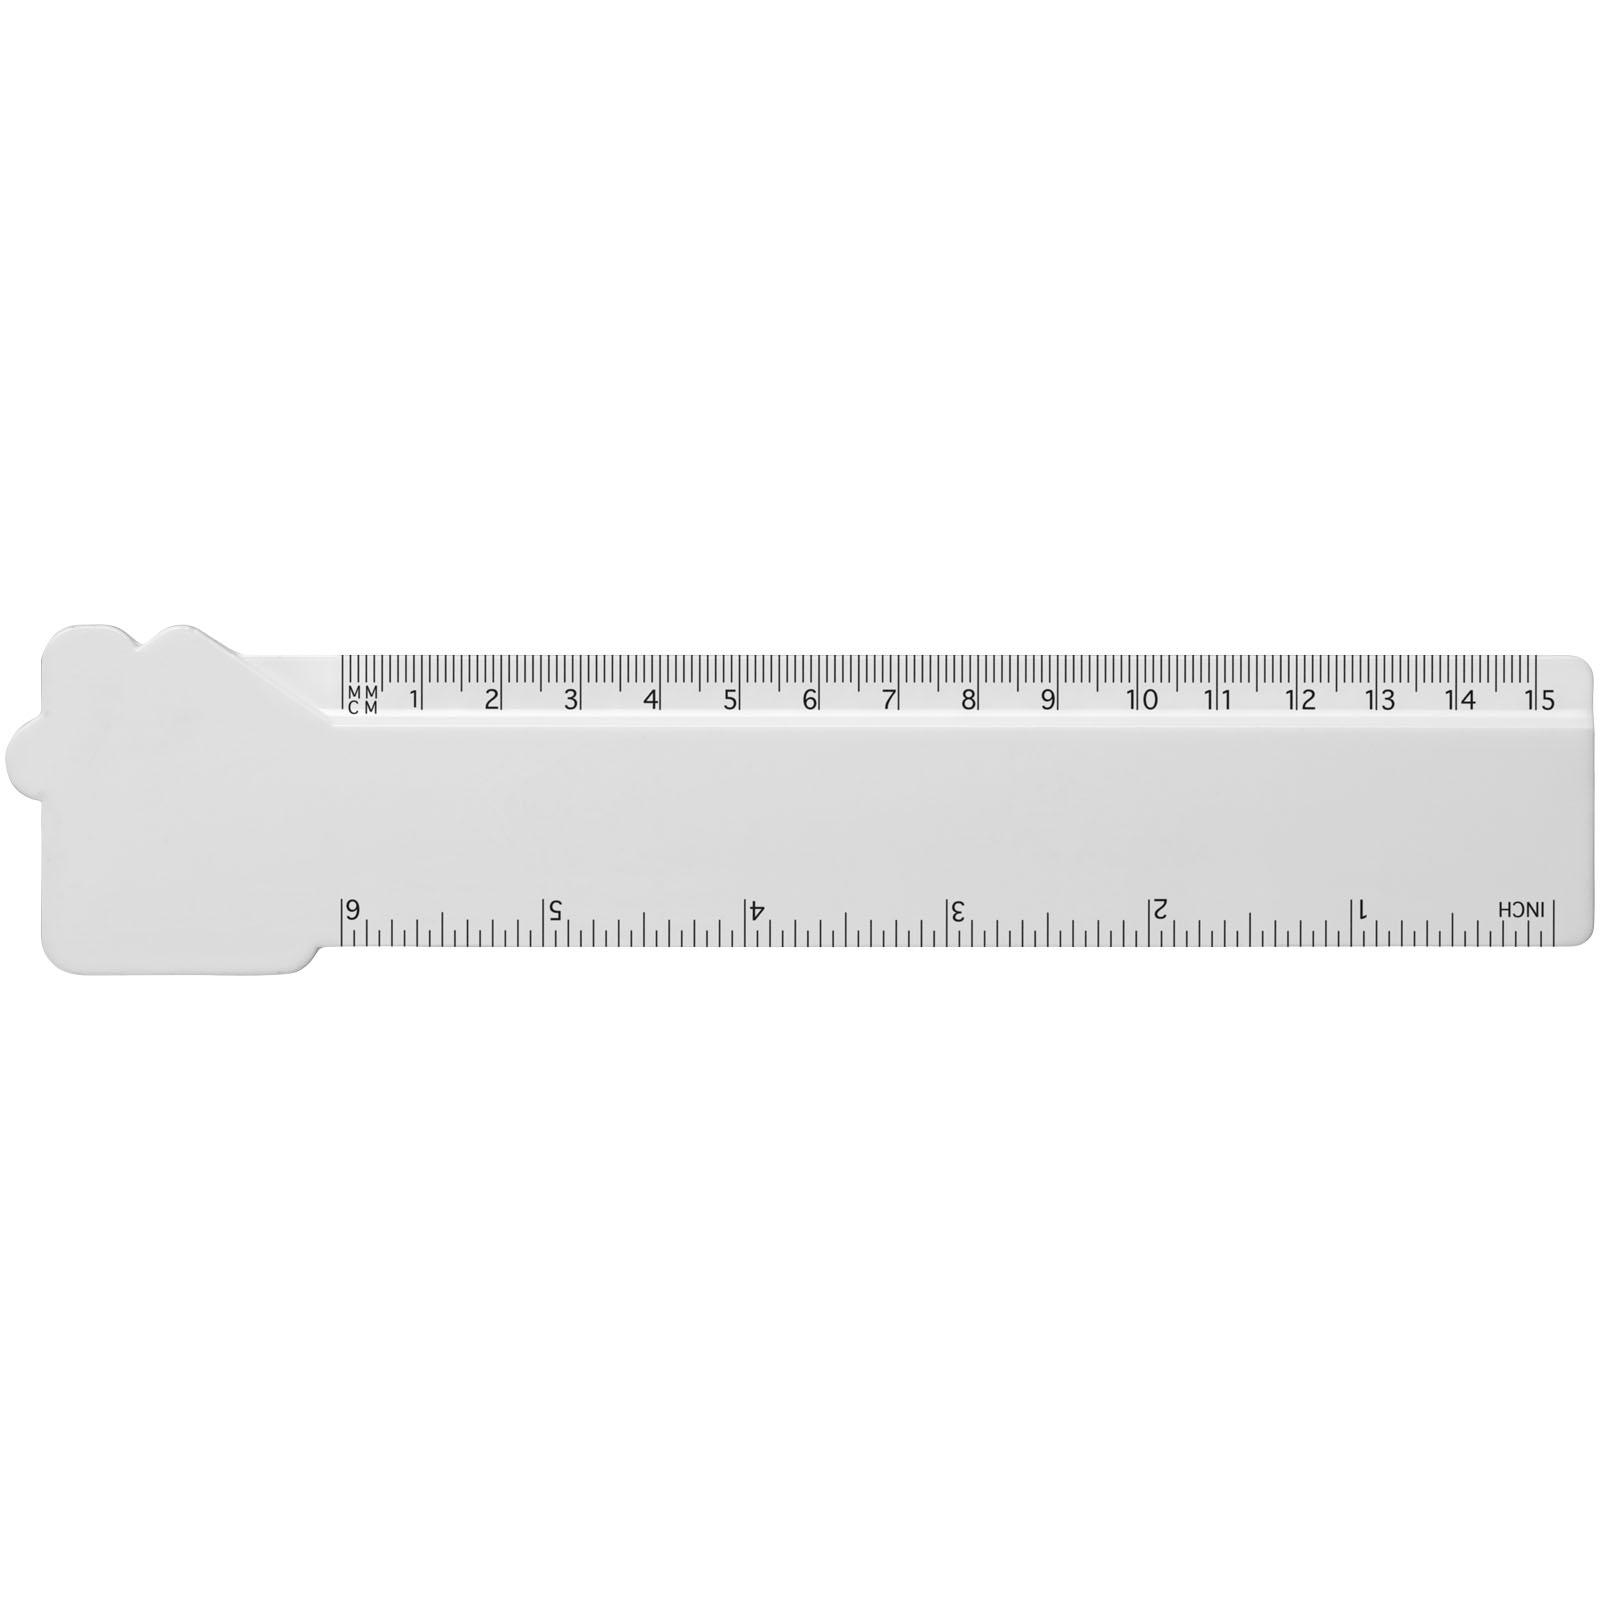 Advertising Desk Accessories - Tait 15 cm house-shaped recycled plastic ruler - 1